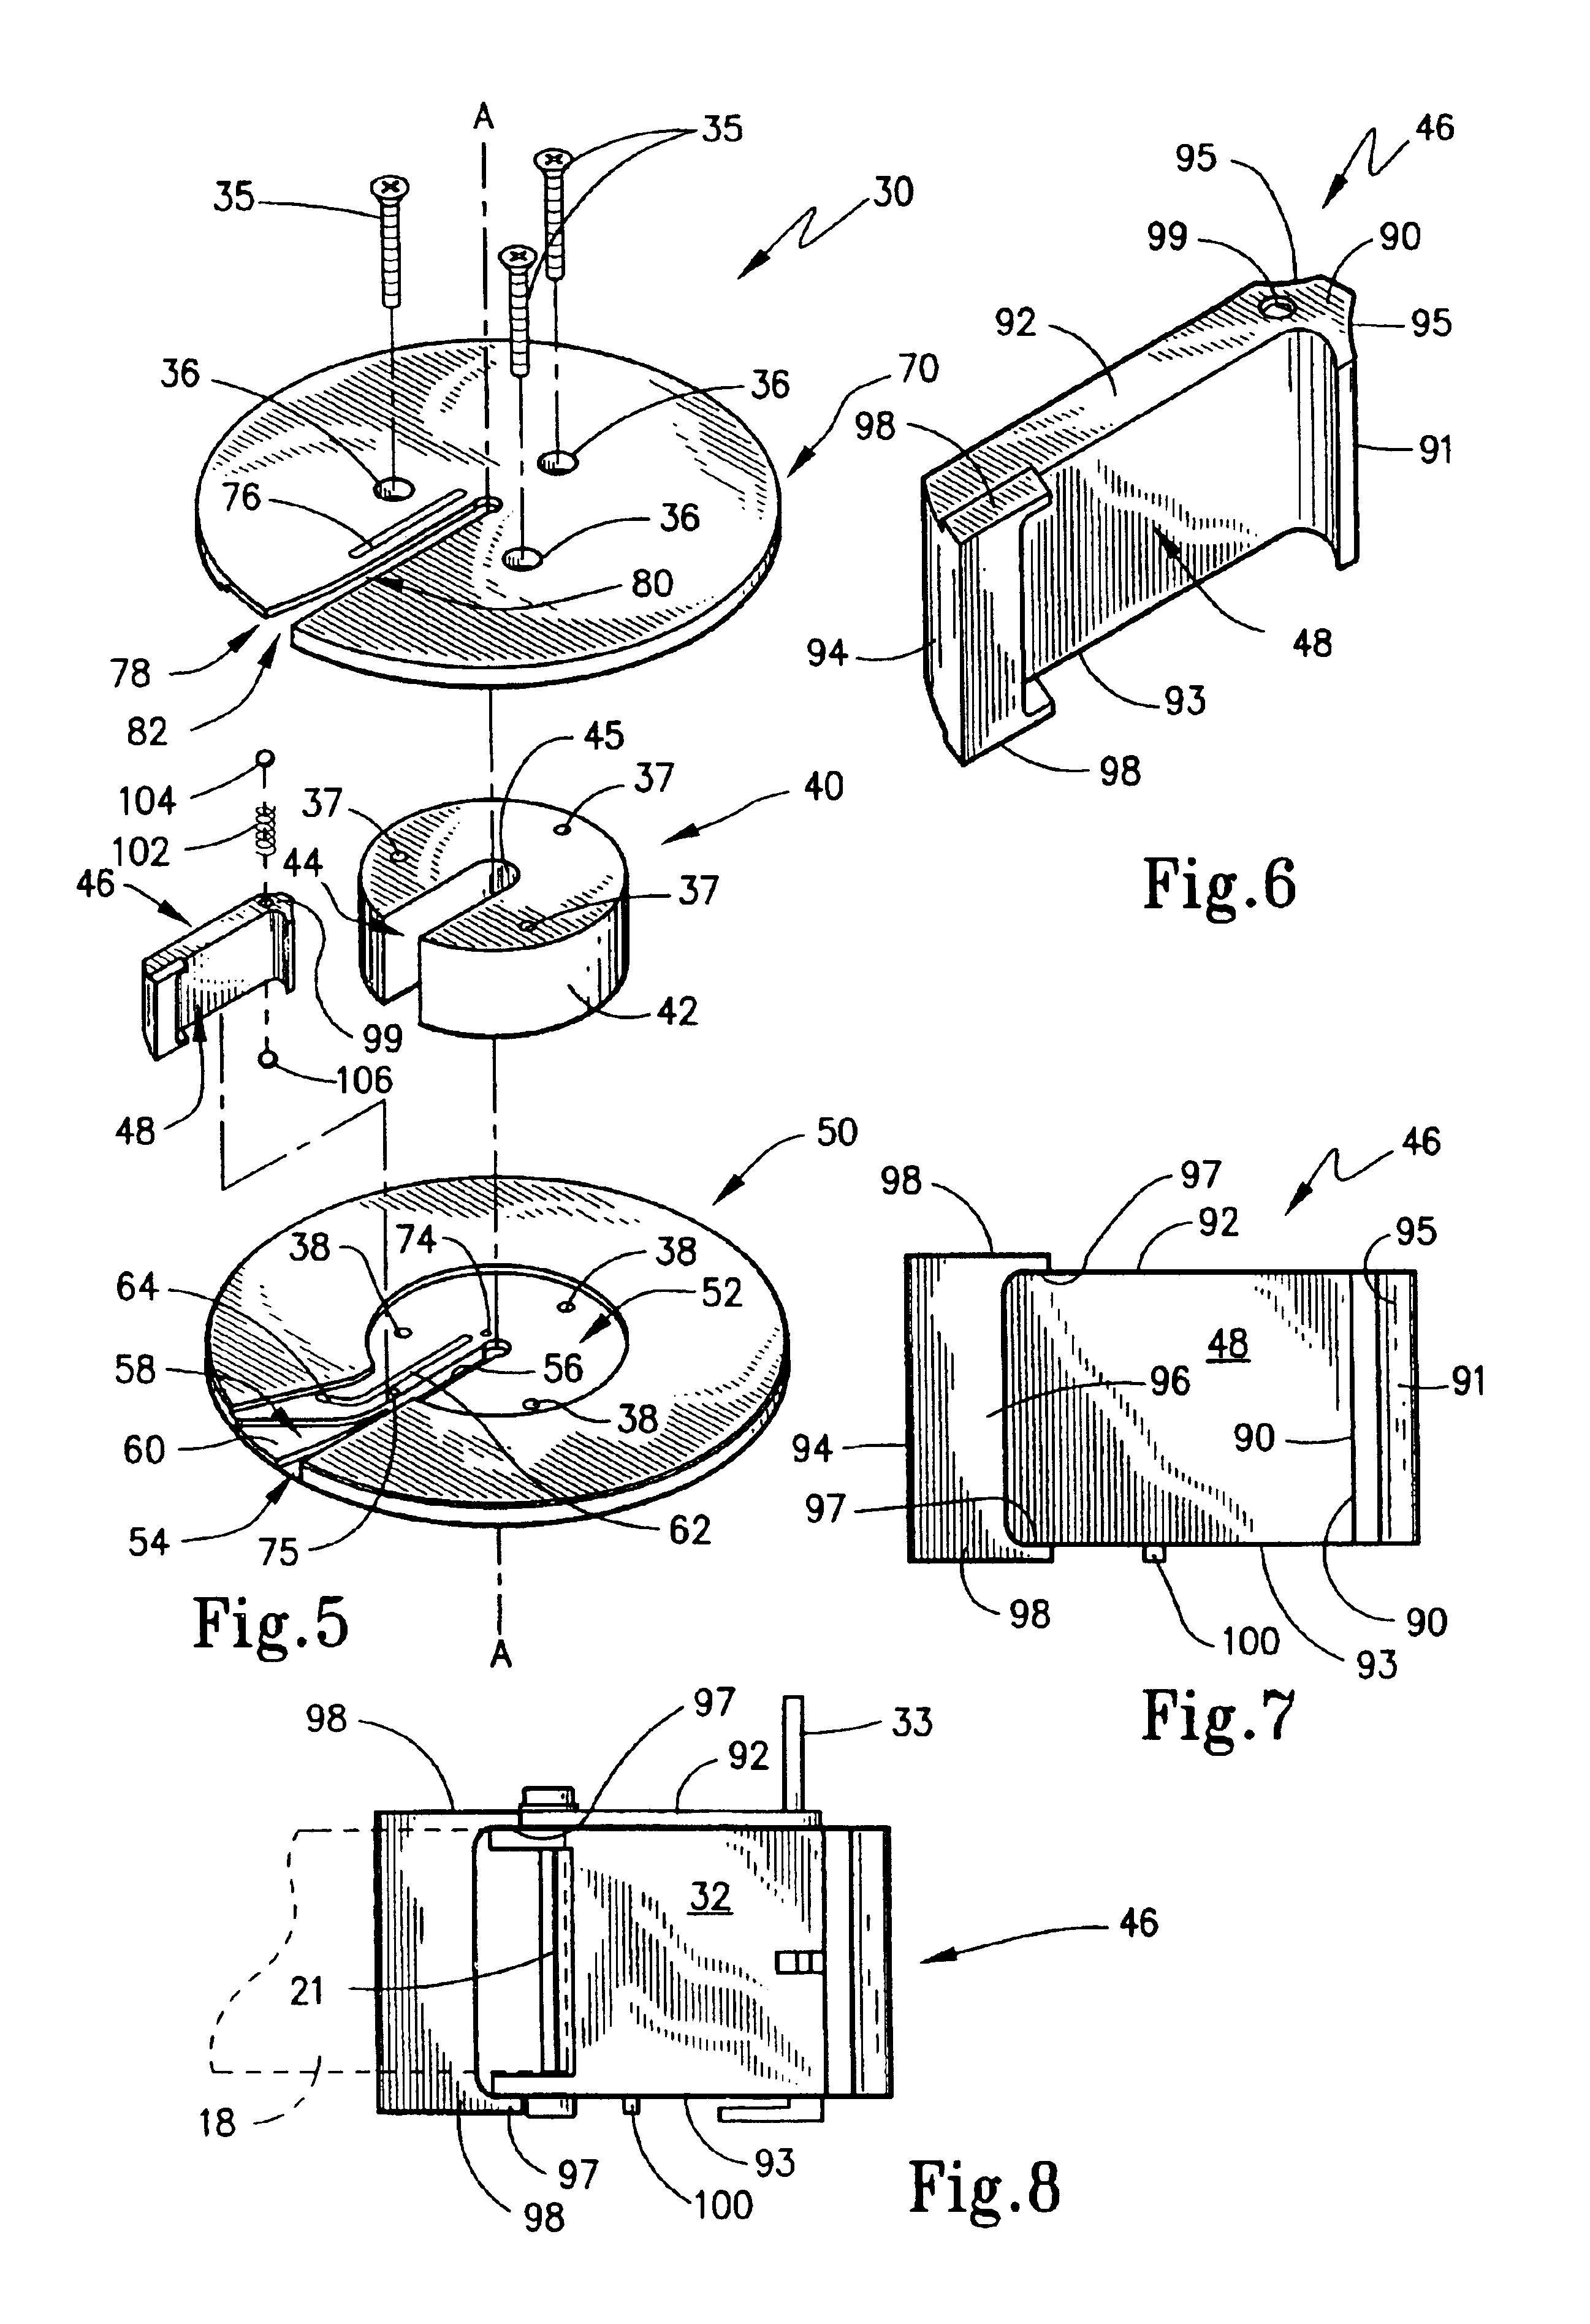 Tape threading apparatus having take-up hub with gap filling block for data storage systems and method therefor